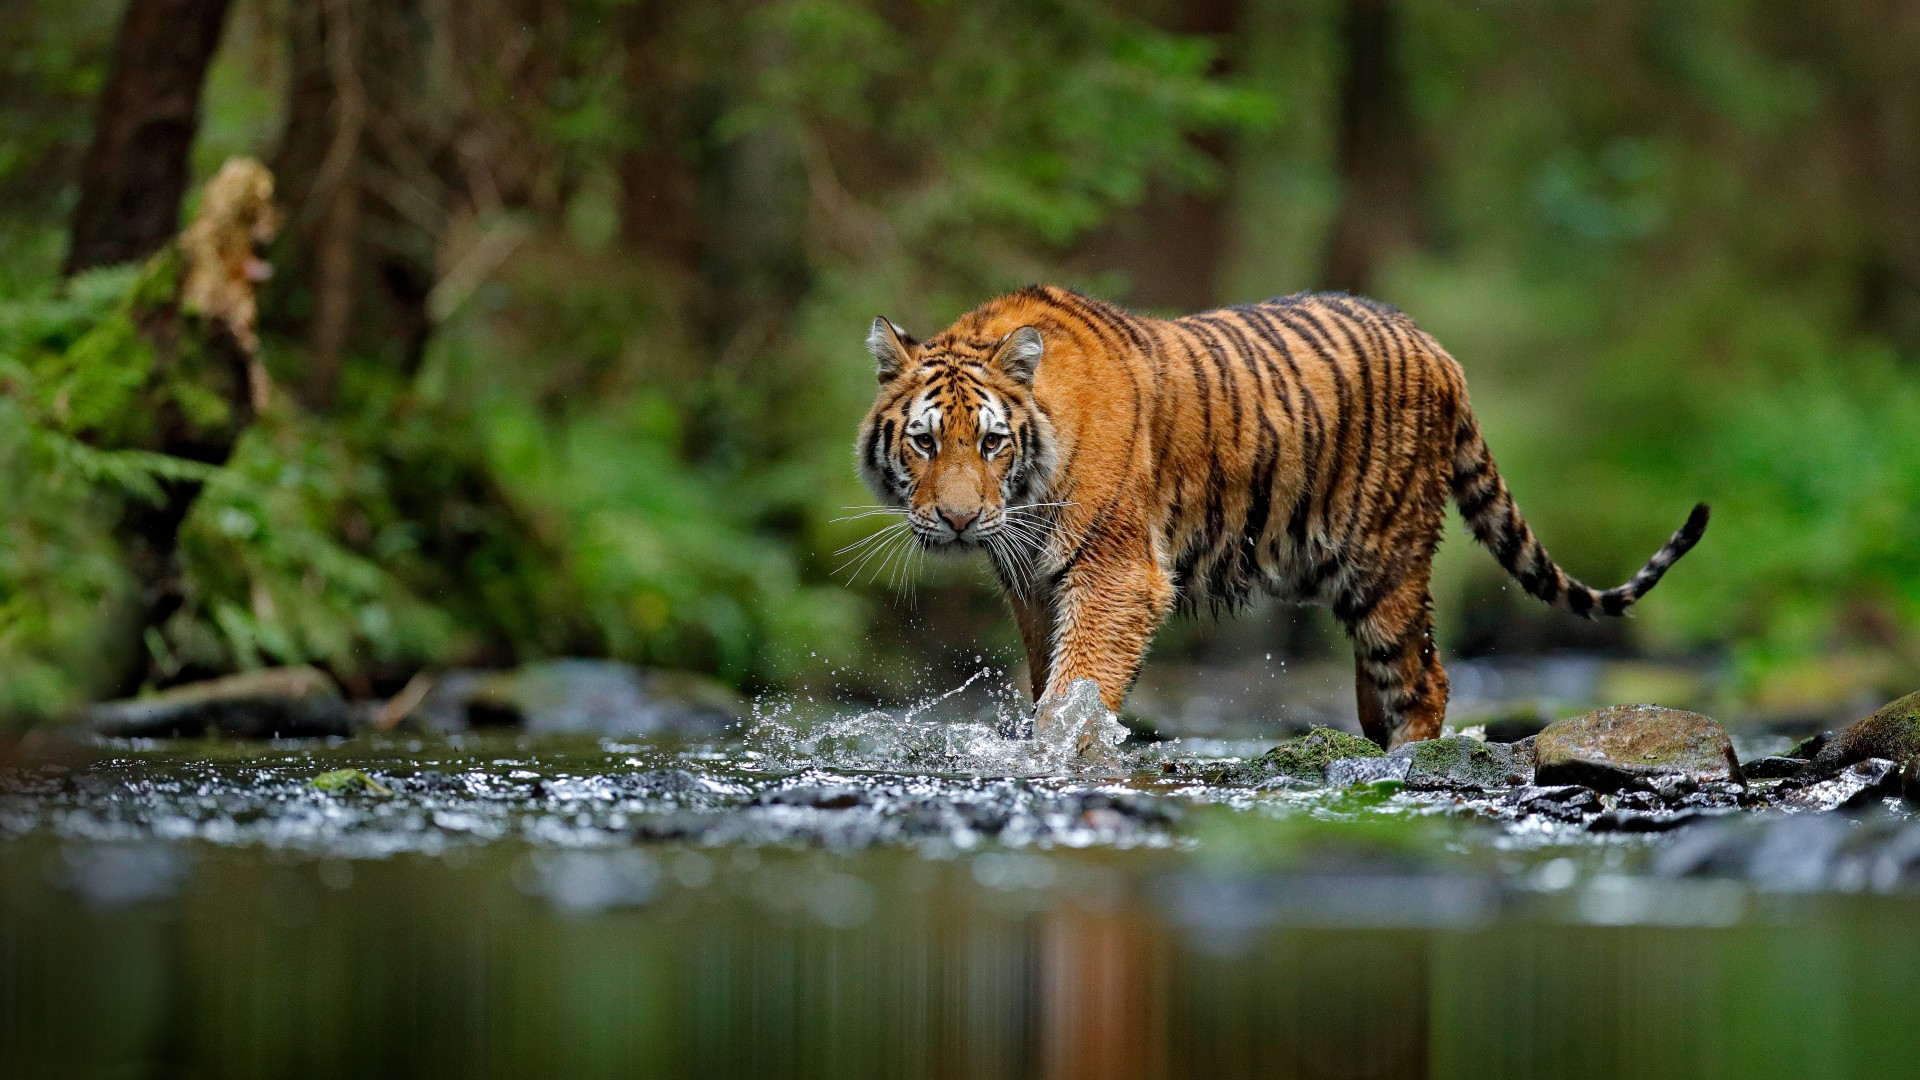 Why are tigers orange when their surroundings are mainly green? - Quora